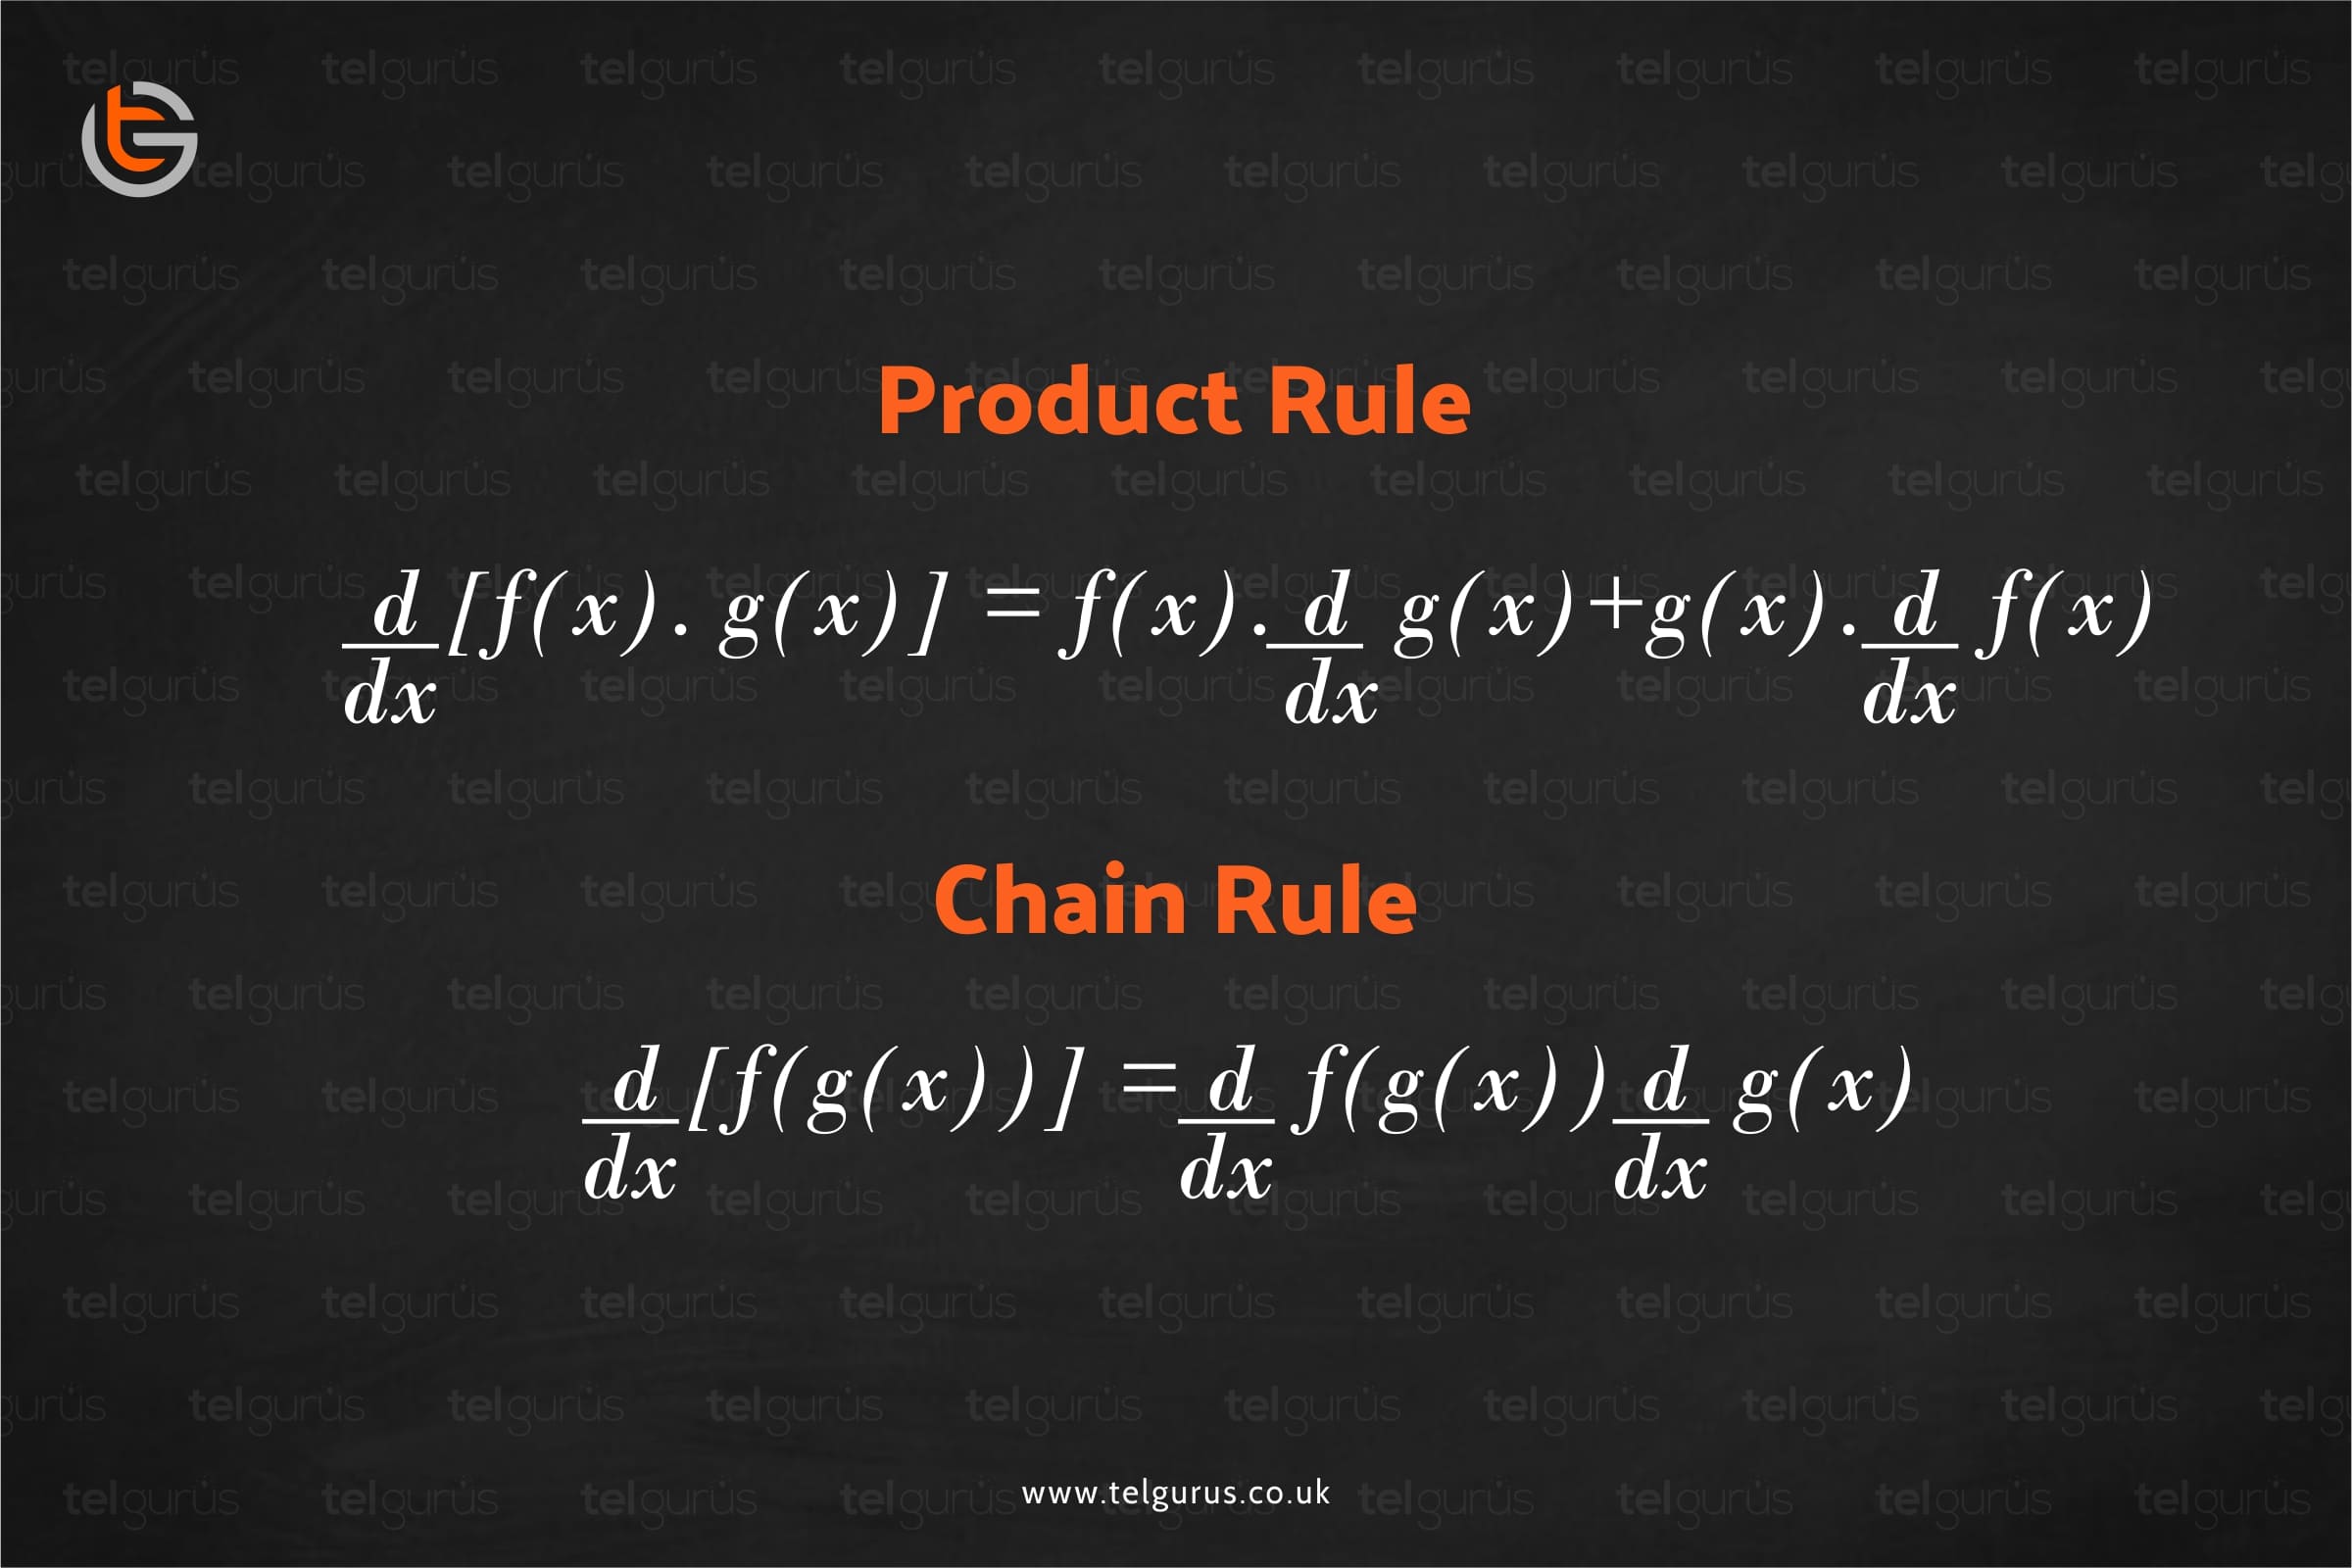 When do I use the chain rule and when do I use the product rule in differentiation